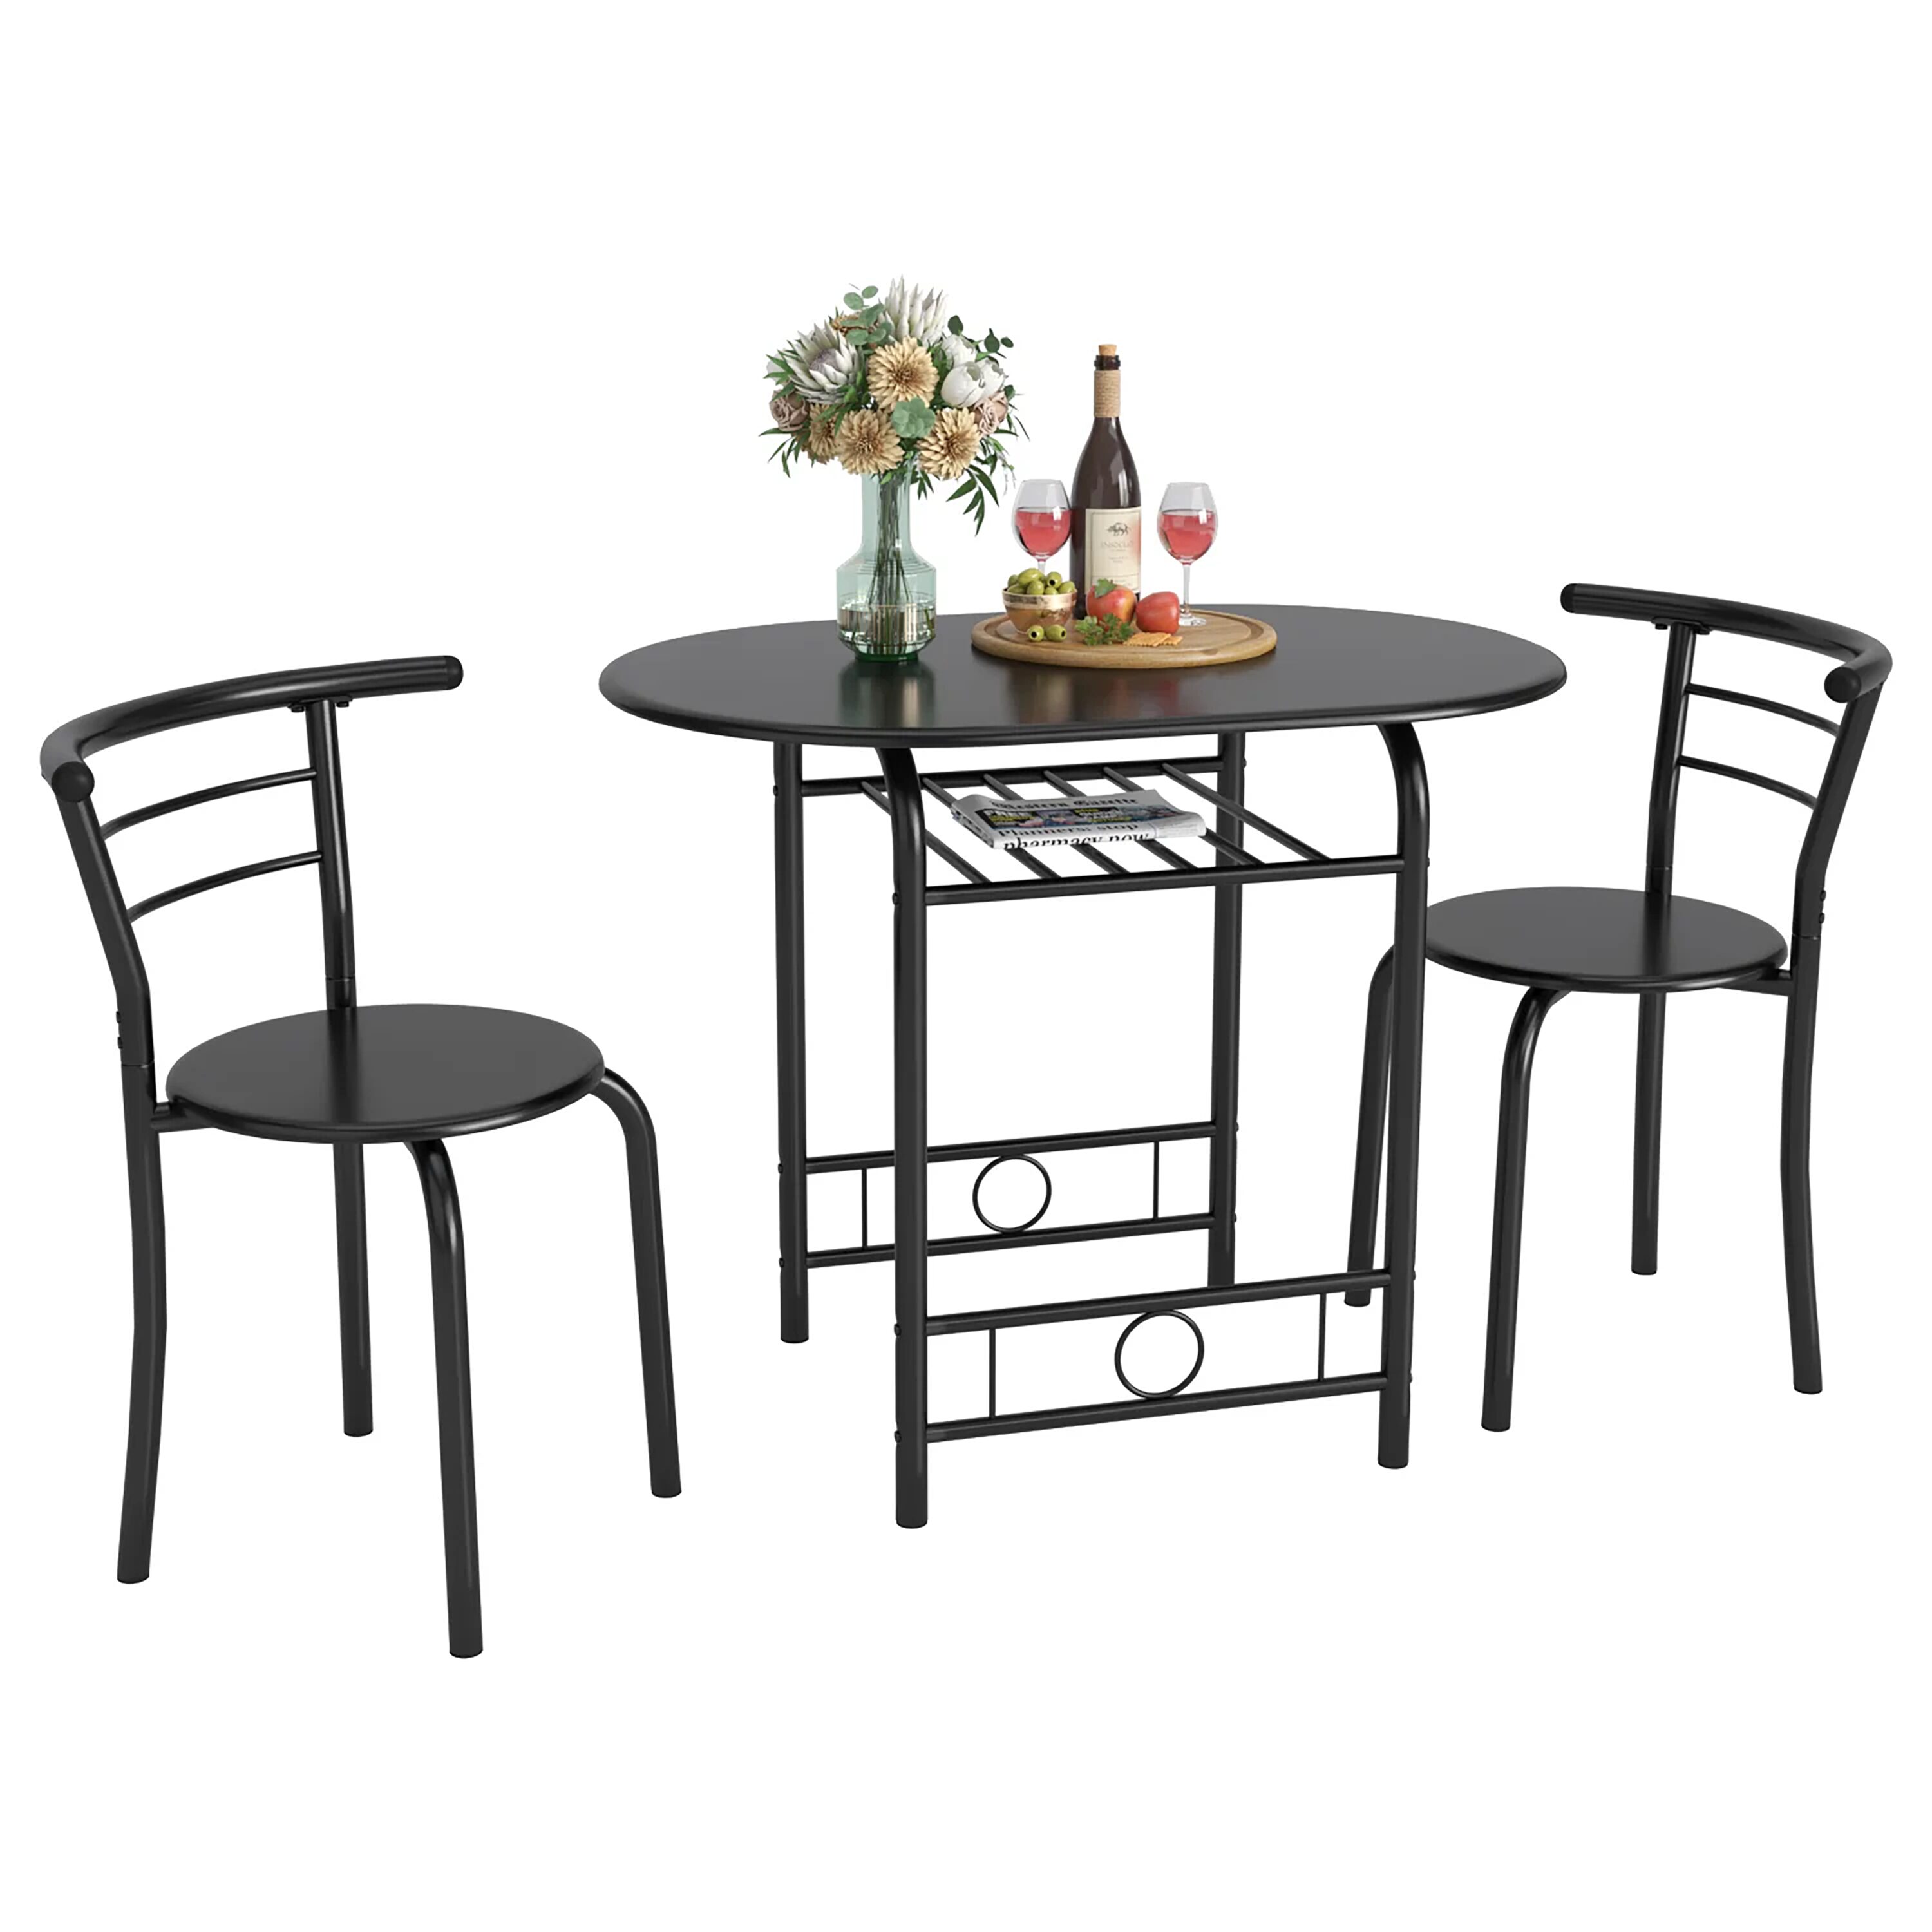 Round Shaped Table Dining Room Sets at Lowes.com